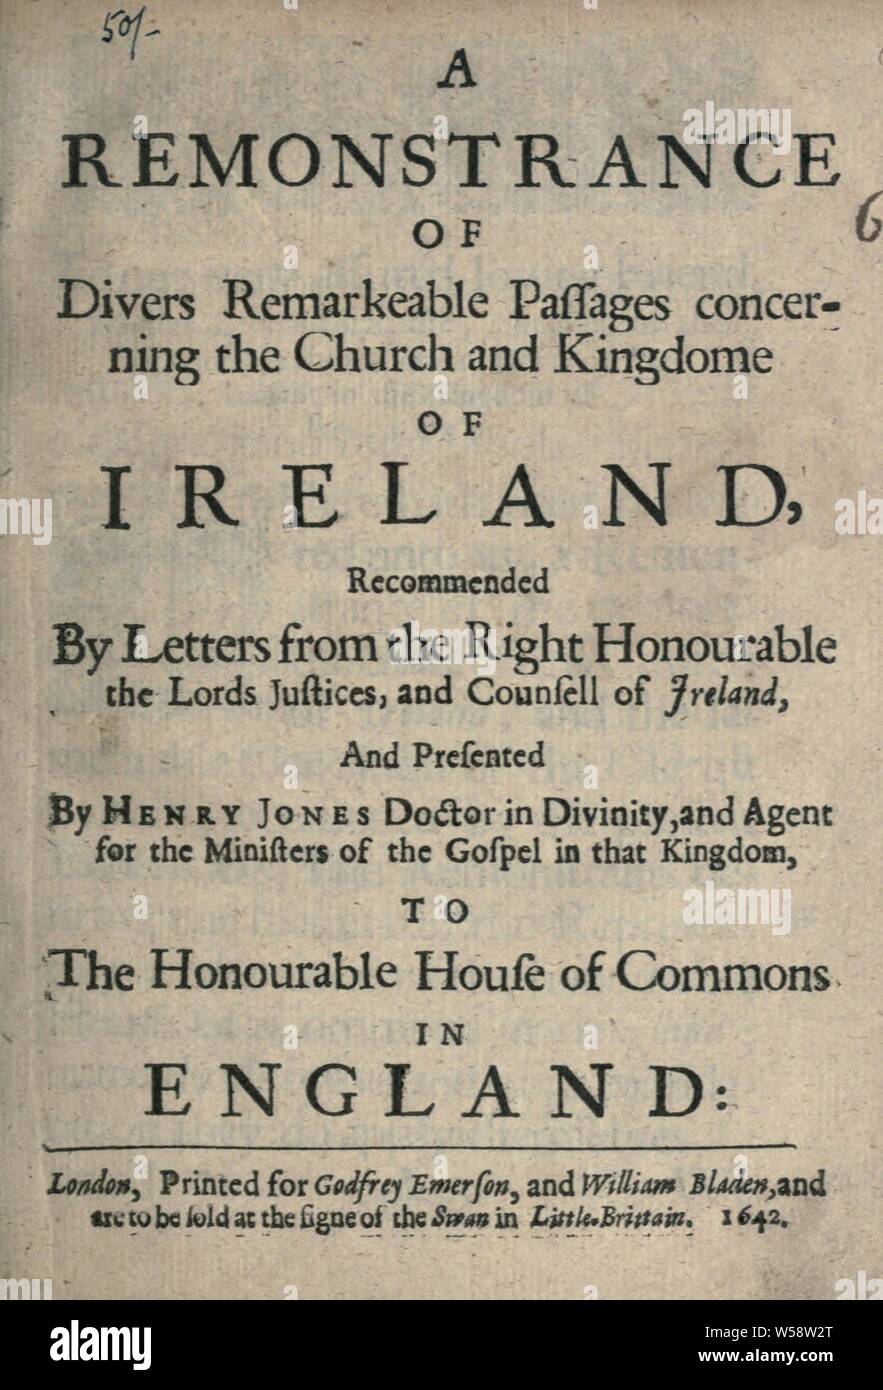 A remonstrance of divers remarkeable passages concerning the Church and Kingdome of Ireland : recommended by letters from the Right Honourable the Lords Justices and Counsell of Ireland and presented by Henry Jones to the Honourable House of Commons in England : Jones, Henry, 1605-1682 Stock Photo